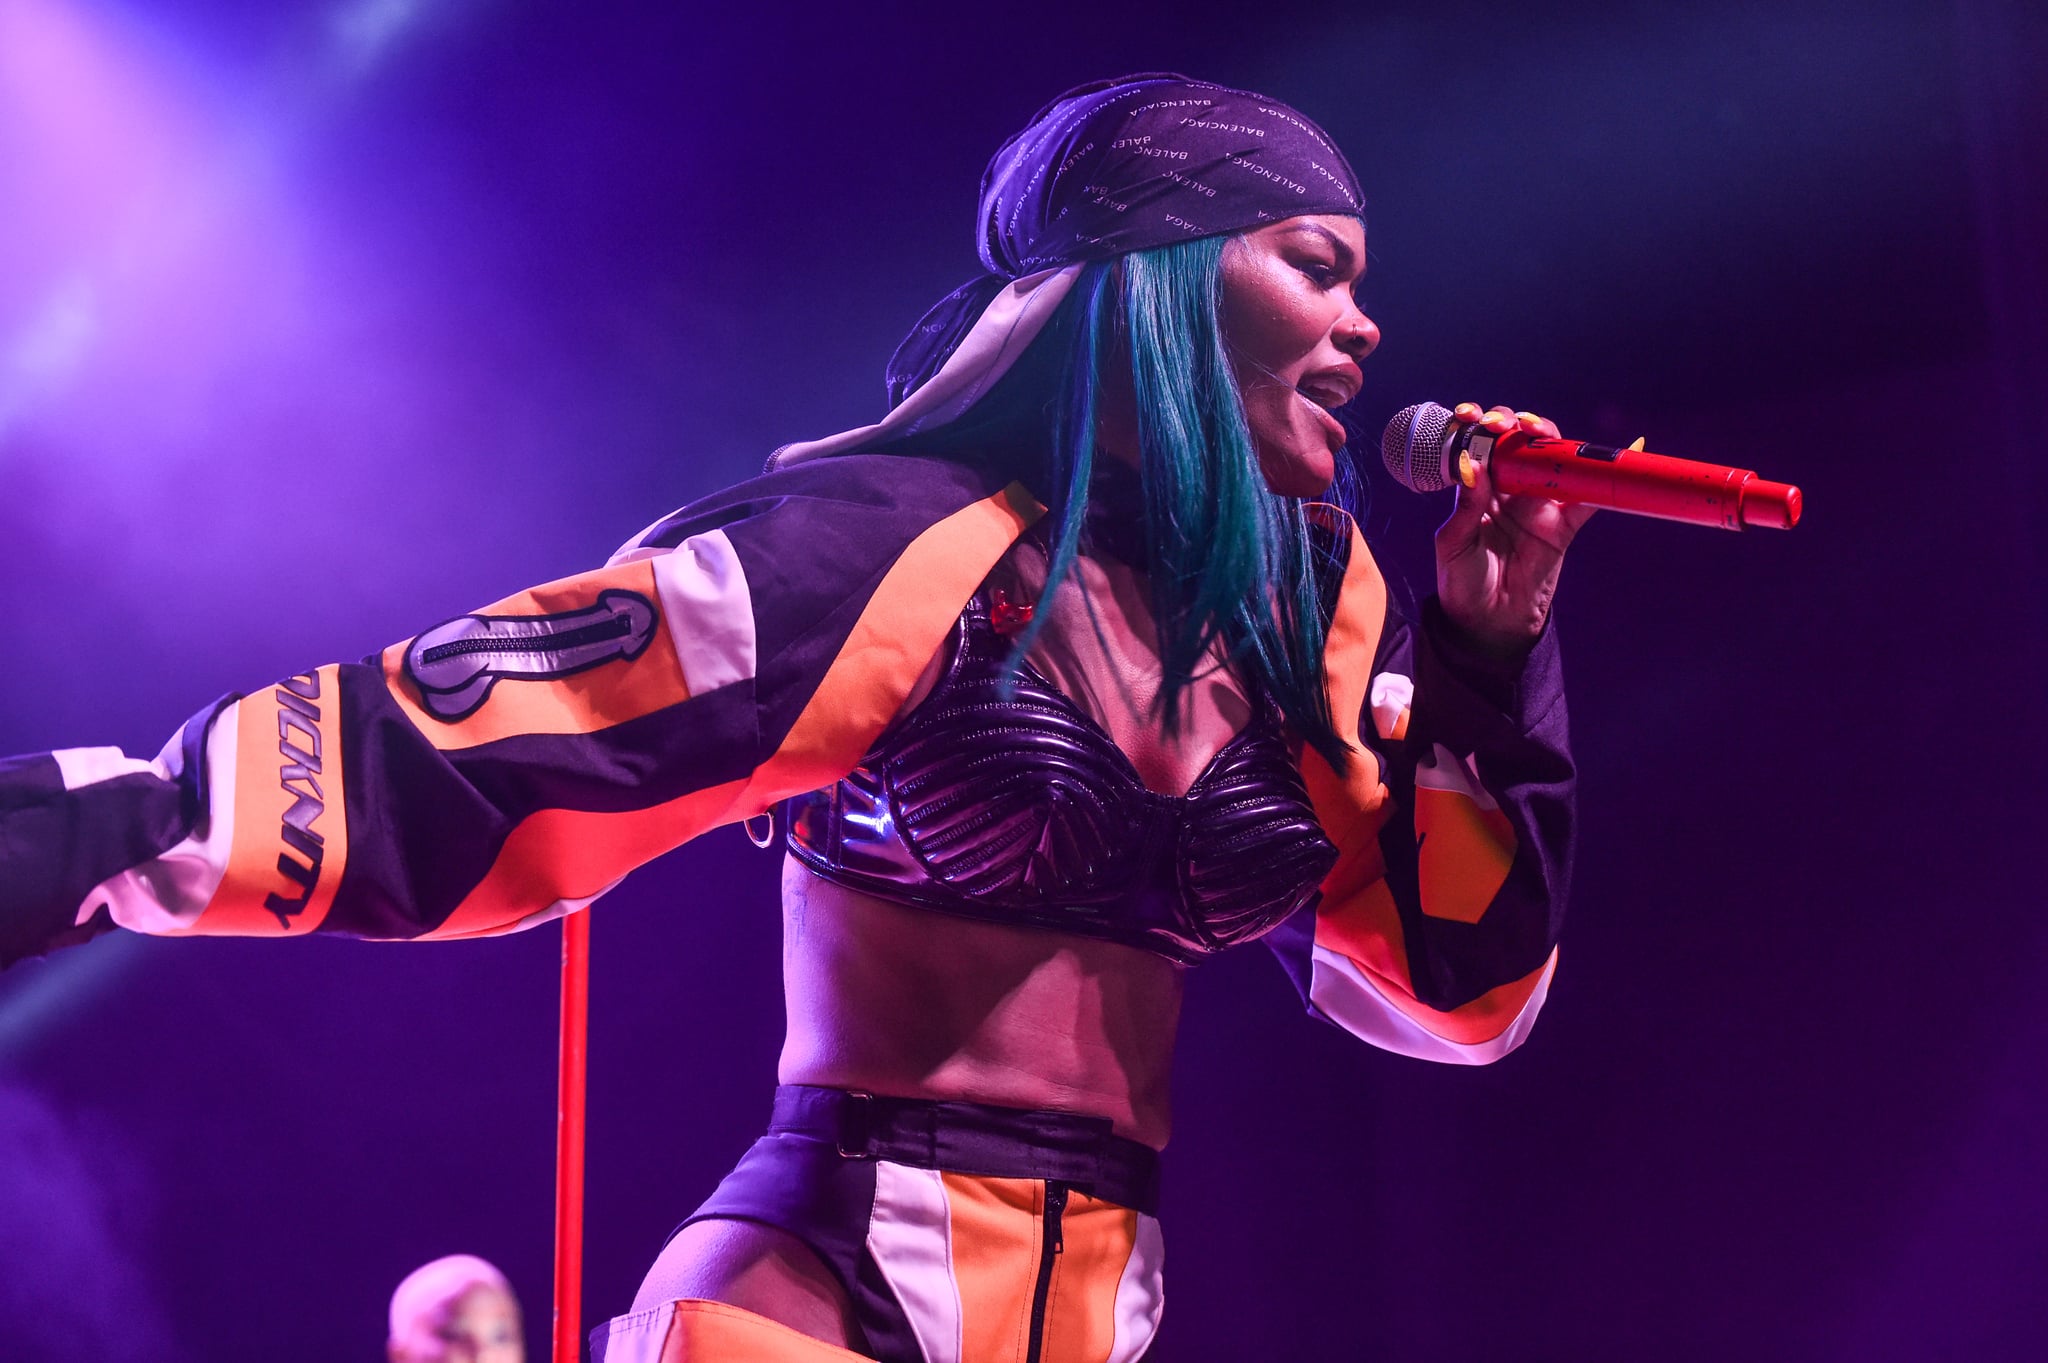 DETROIT, MI - AUGUST 17:  Singer Teyana Taylor performs on stage during the 'Keep That Same Energy' (K.T.S.E.) Tour at The Majestic Theatre on August 17, 2018 in Detroit, Michigan.  (Photo by Aaron J. Thornton/Getty Images)